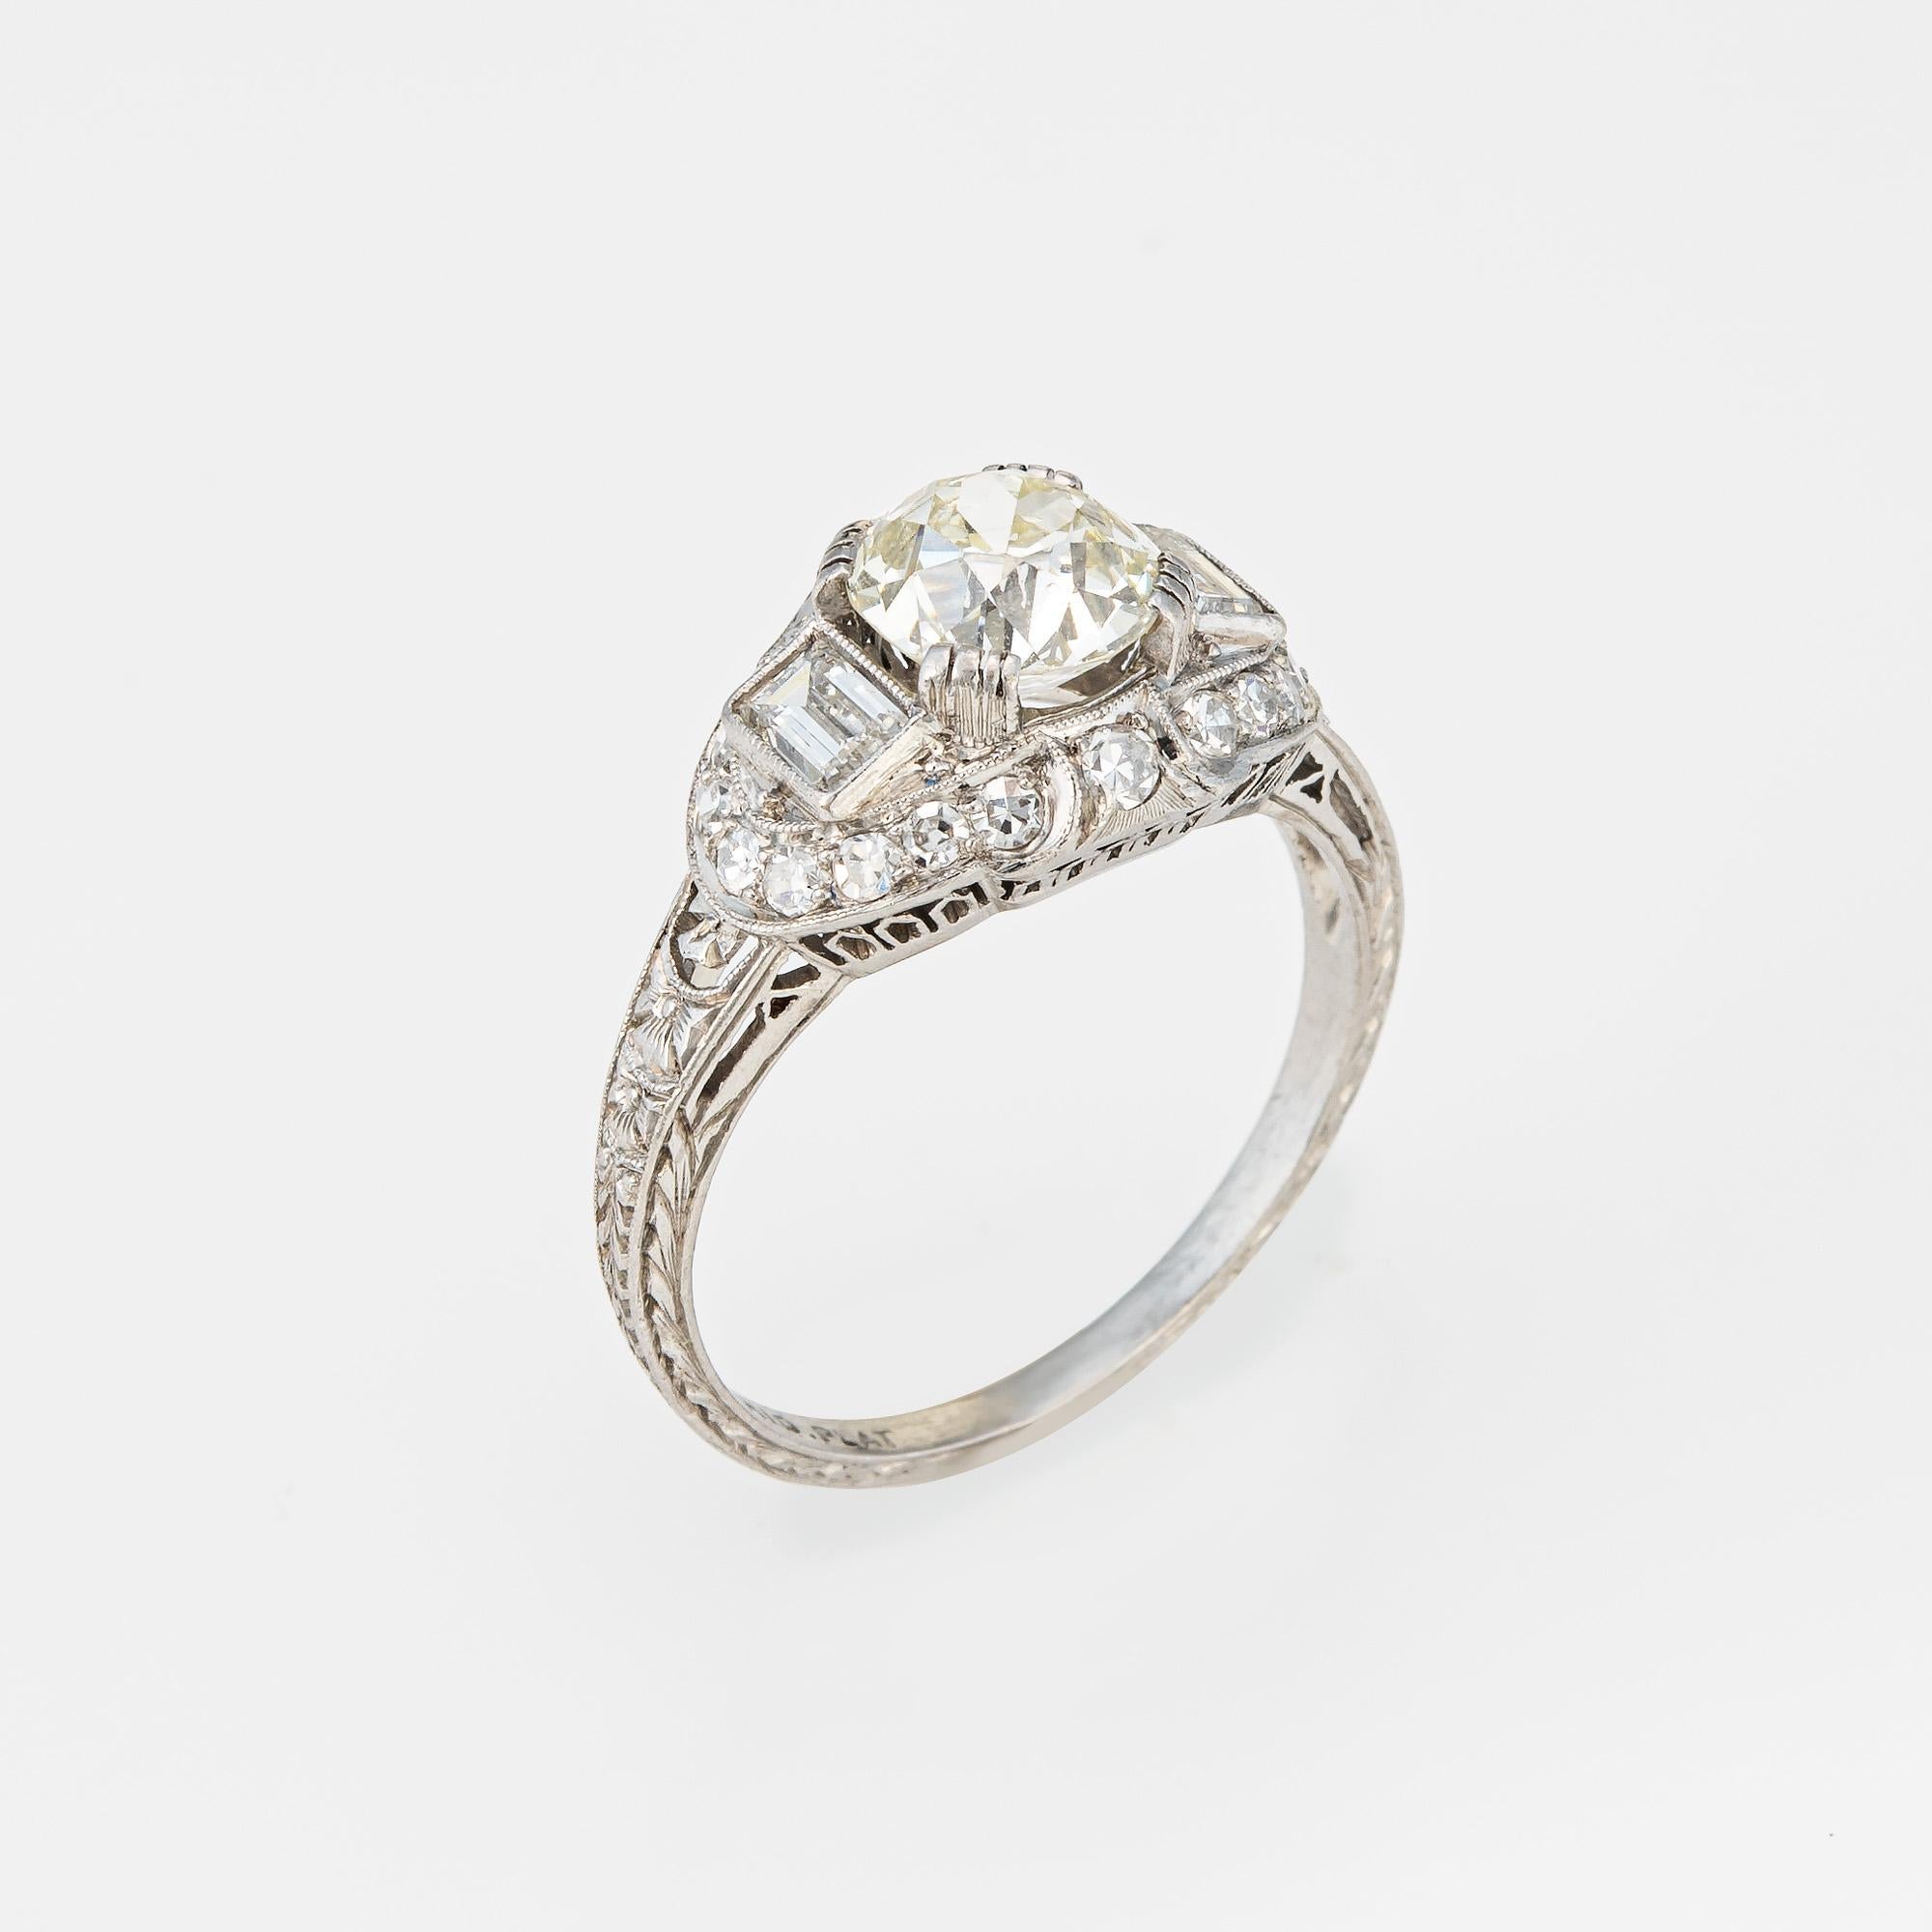 Finely detailed vintage Art Deco 1.35ct old European brilliant cut diamond engagement ring (circa 1920s to 1930s) crafted in platinum. 

Center set old European brilliant cut diamond measures 7.01 x 6.77 x 4.65mm and is estimated at 1.35 carats. The